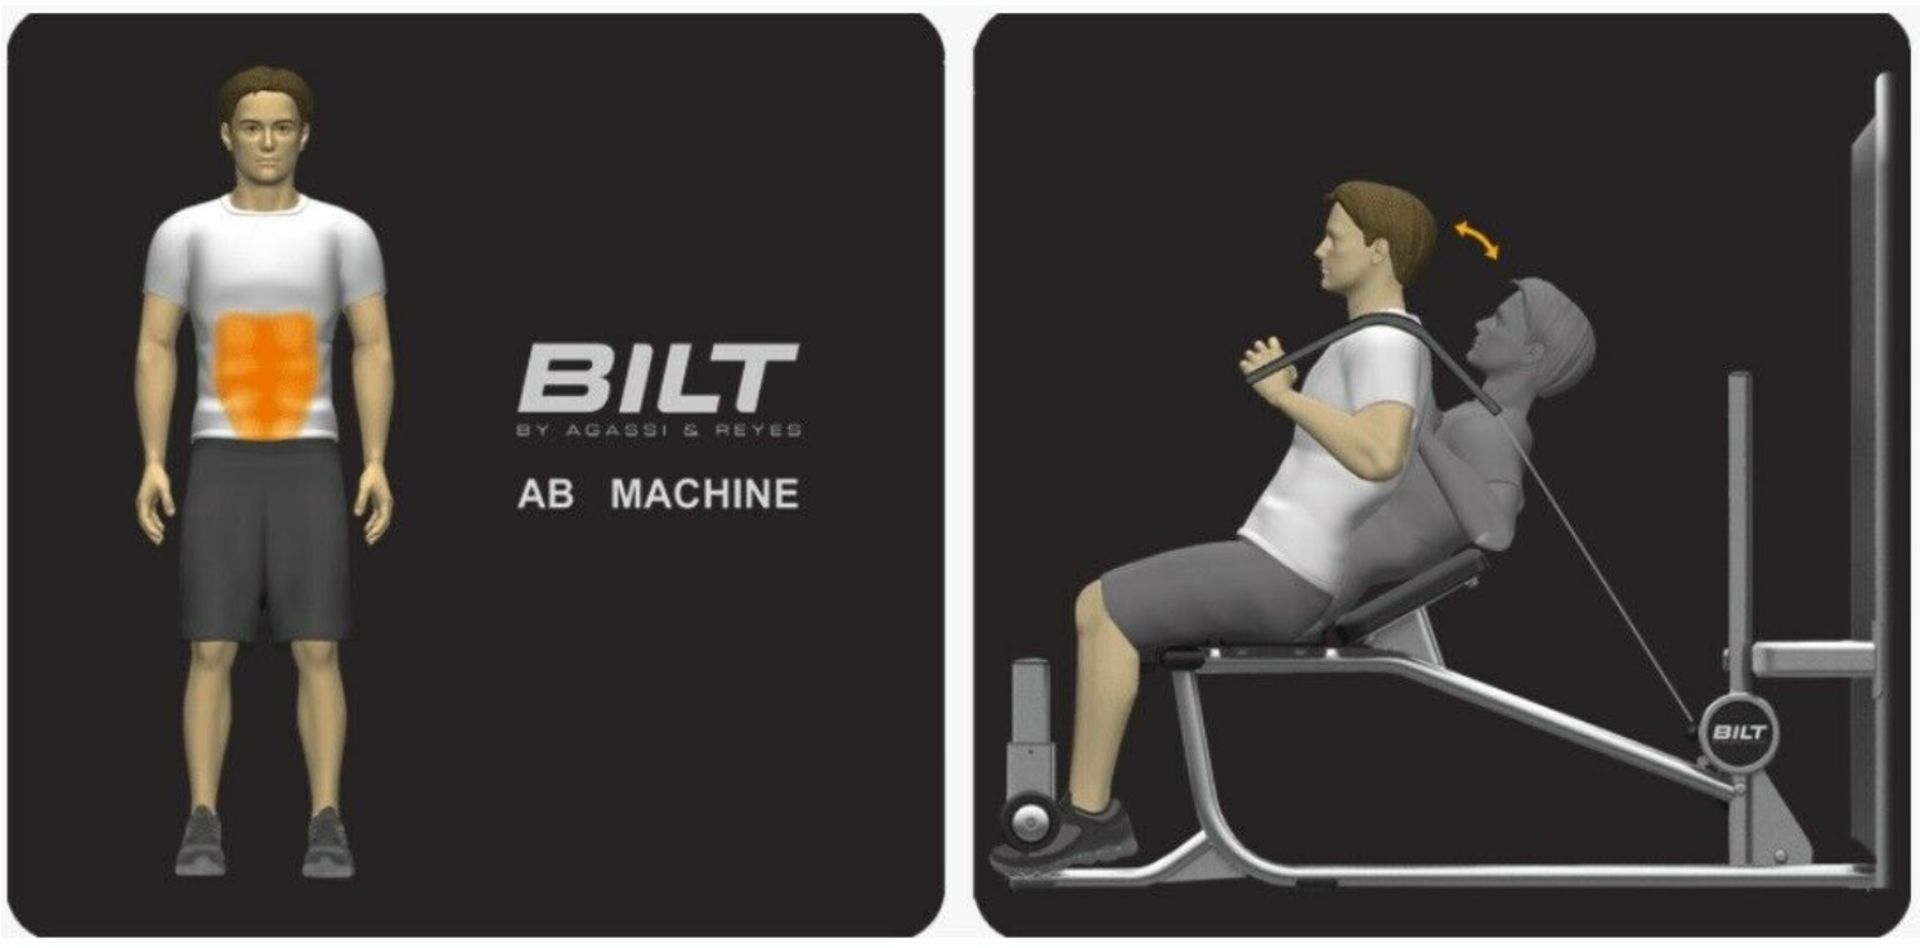 BILT Abdo Commercial Gym Machine By Agassi & Reyes - New / Boxed - Image 5 of 10